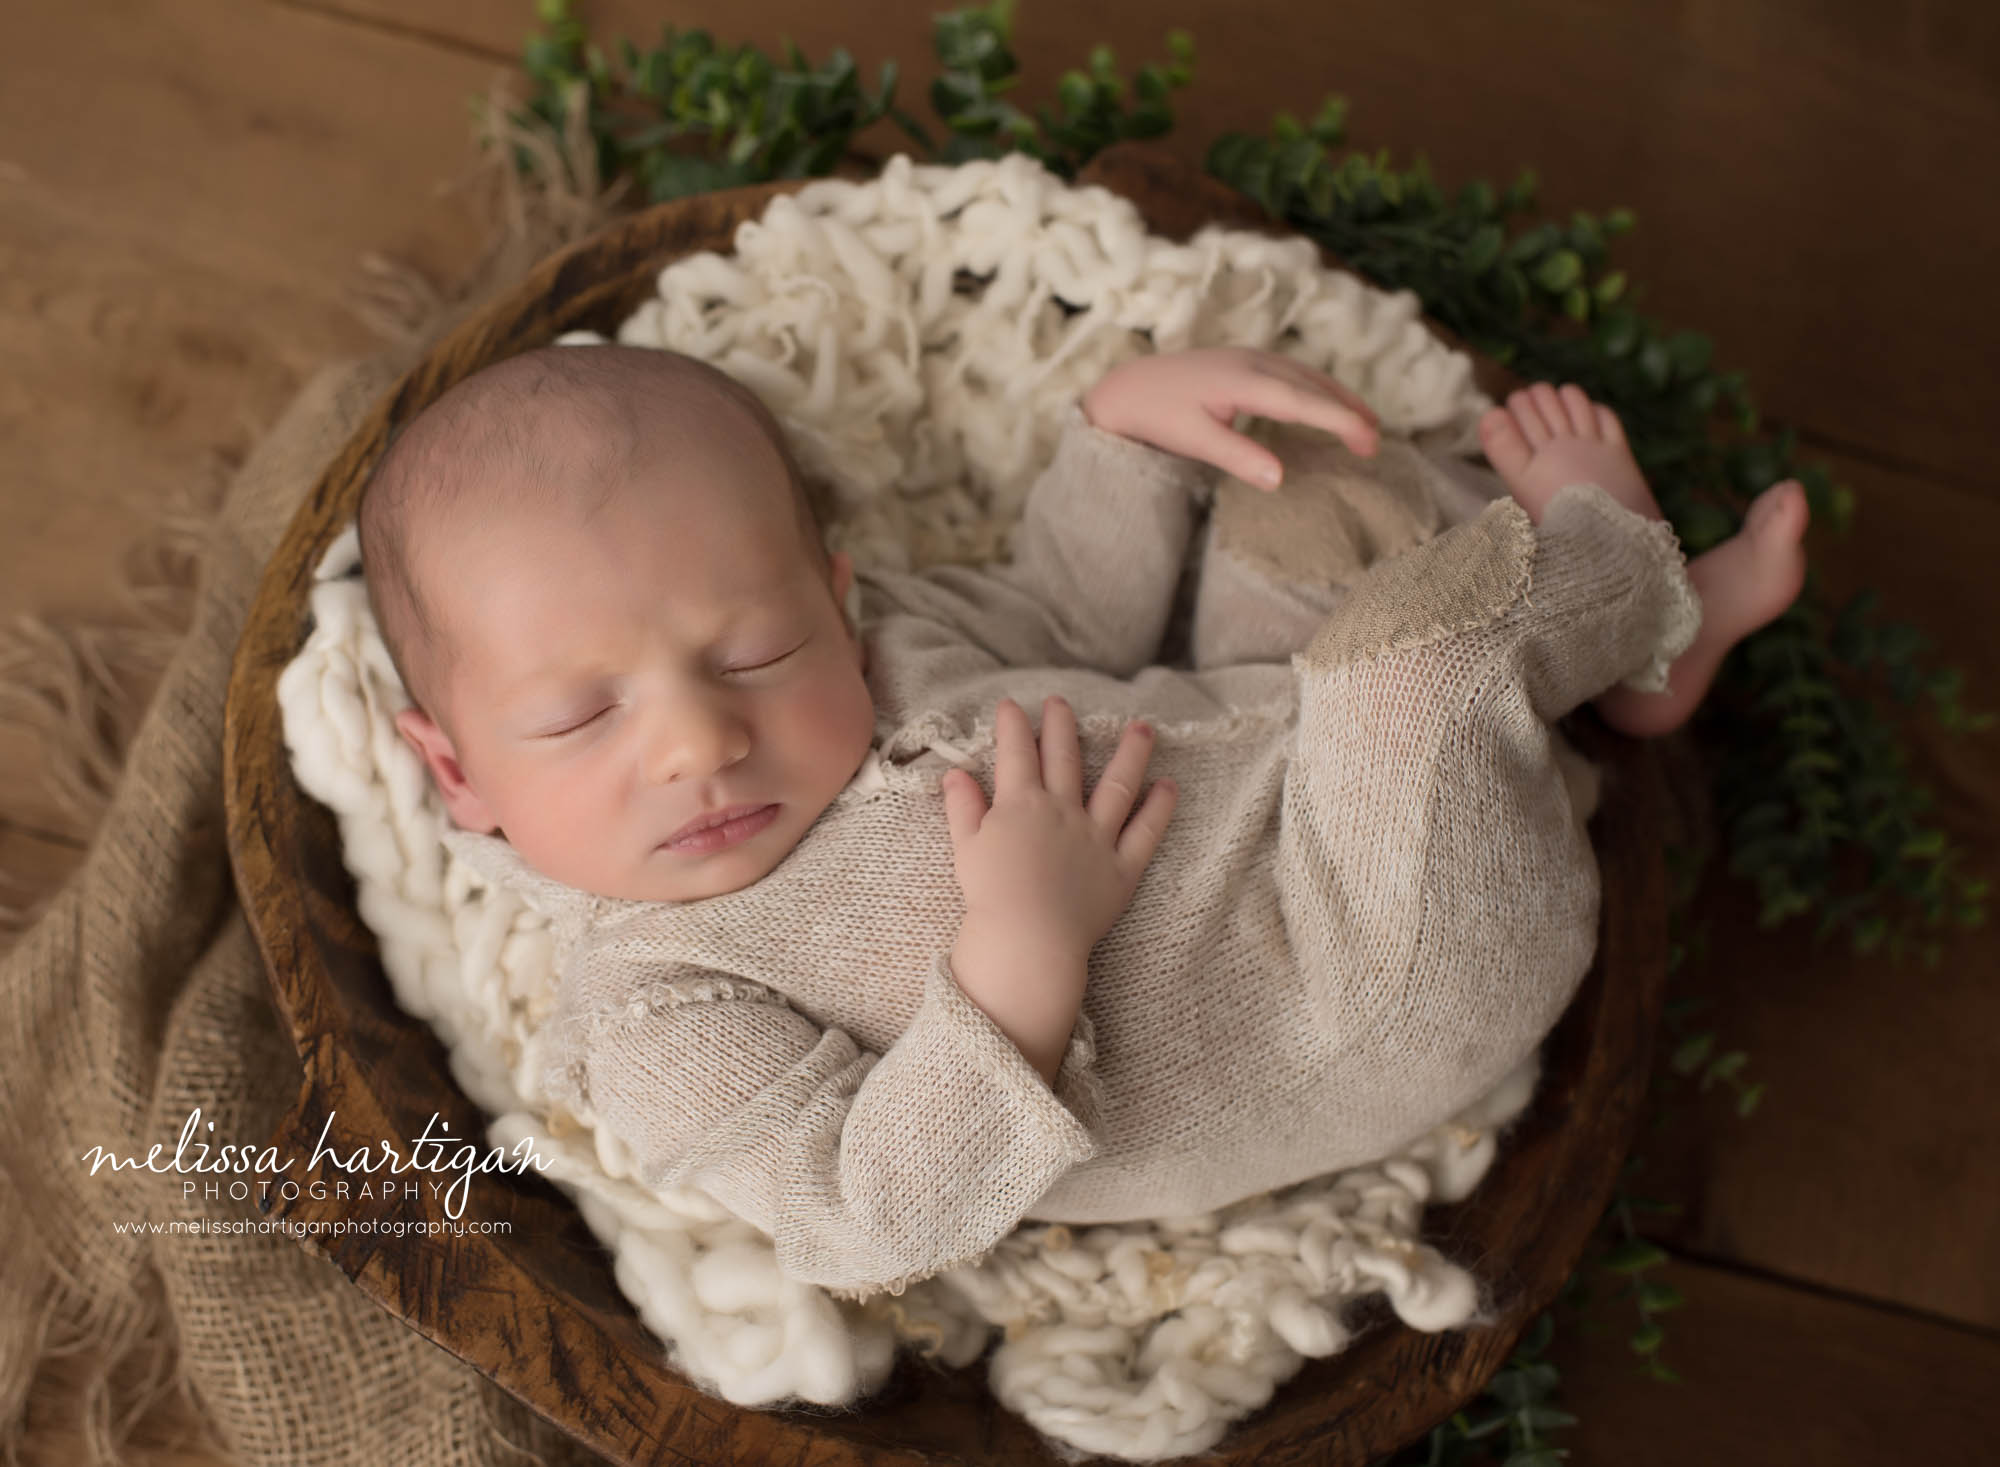 newborn baby boy wearing knitted outfit posed in wooden bowl